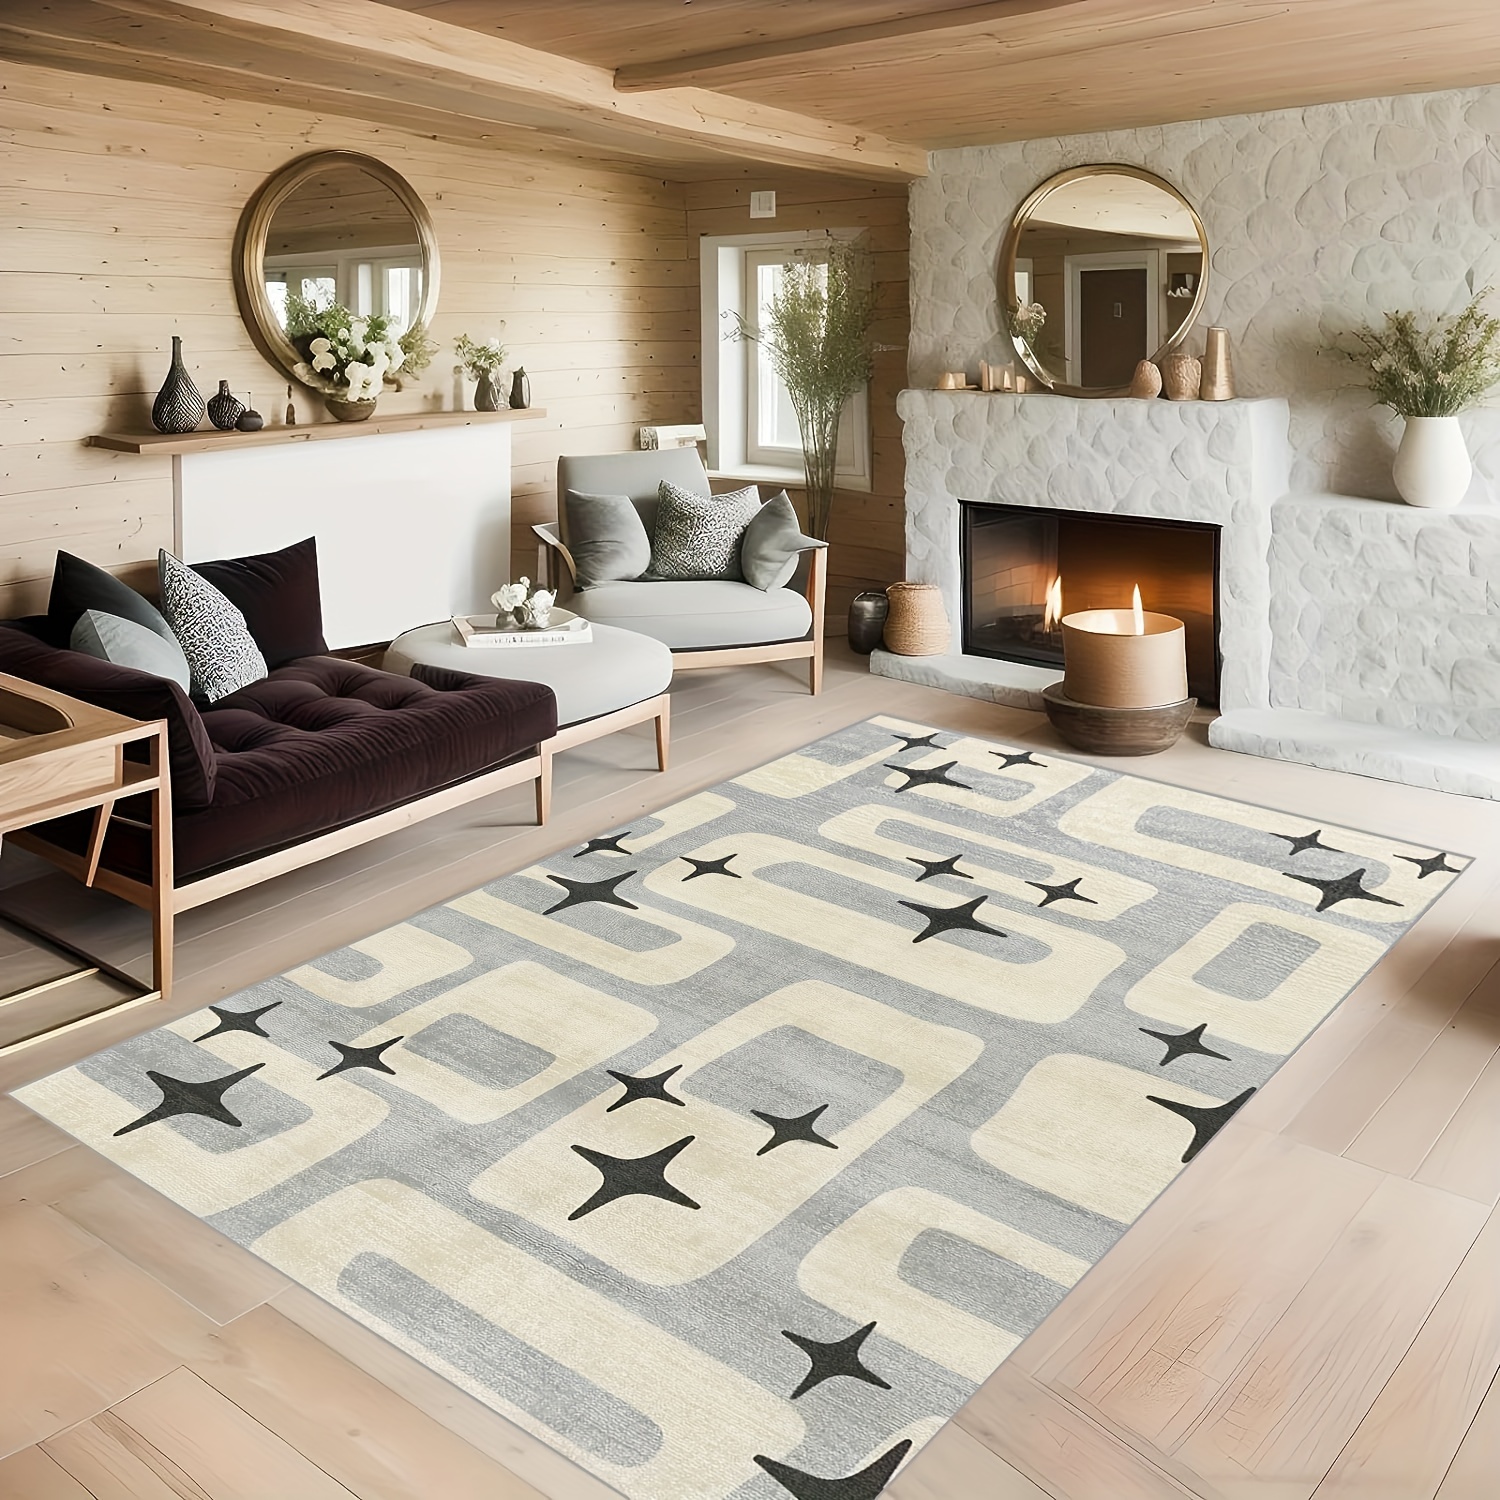 Stylish Tips for Securing Area Rugs in Place